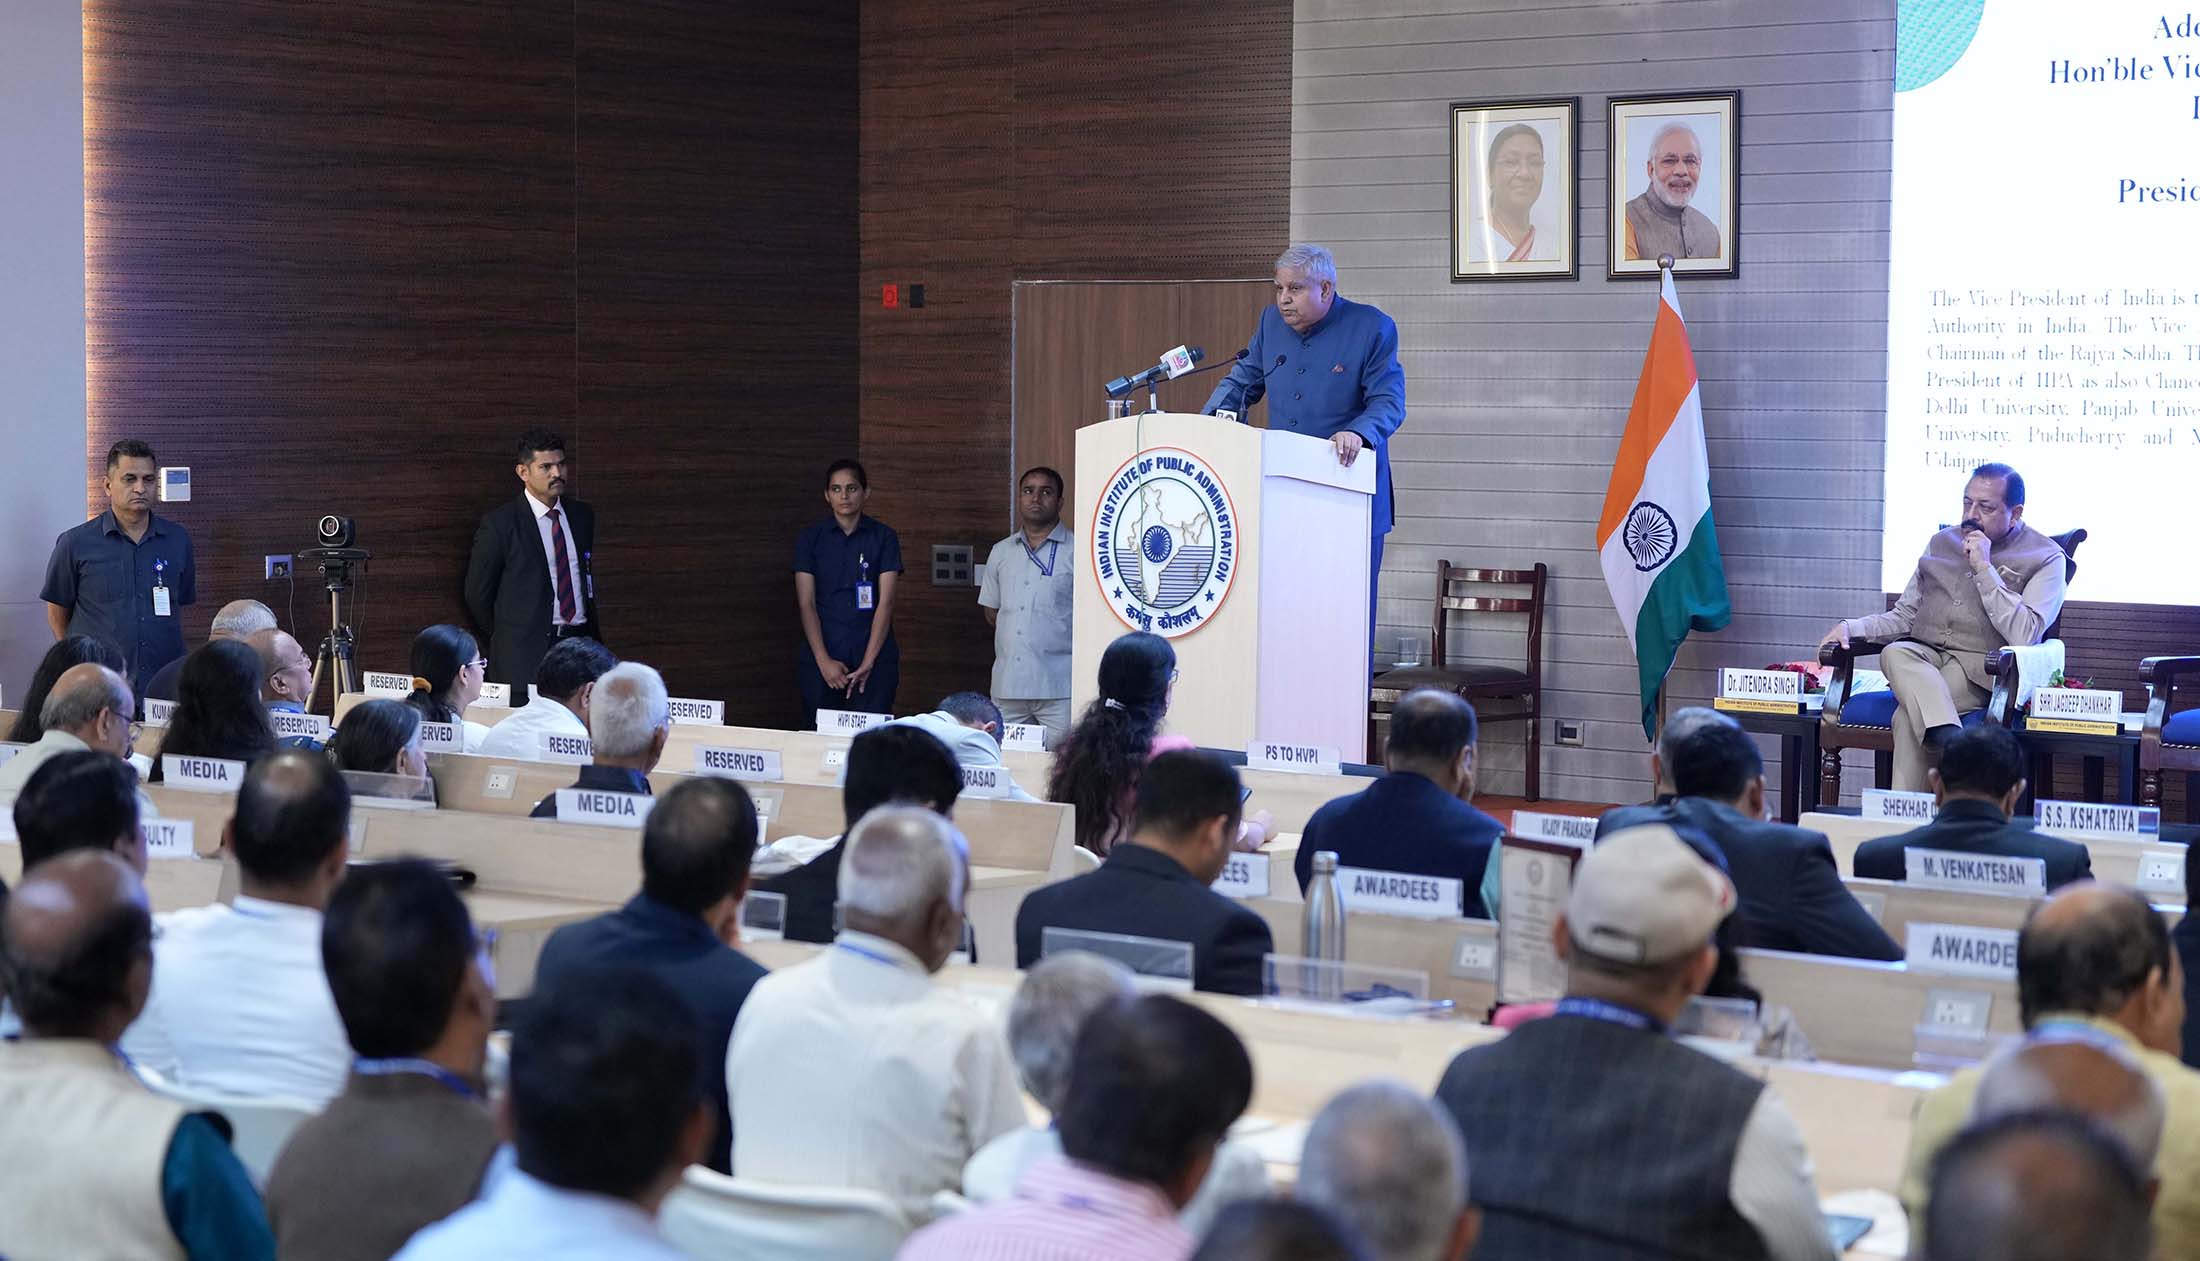 The Vice-President, Shri Jagdeep Dhankhar addressing the gathering at the 69th Annual Meeting of the General Body of Indian Institute of Public Administration in New Delhi on October 31, 2023.